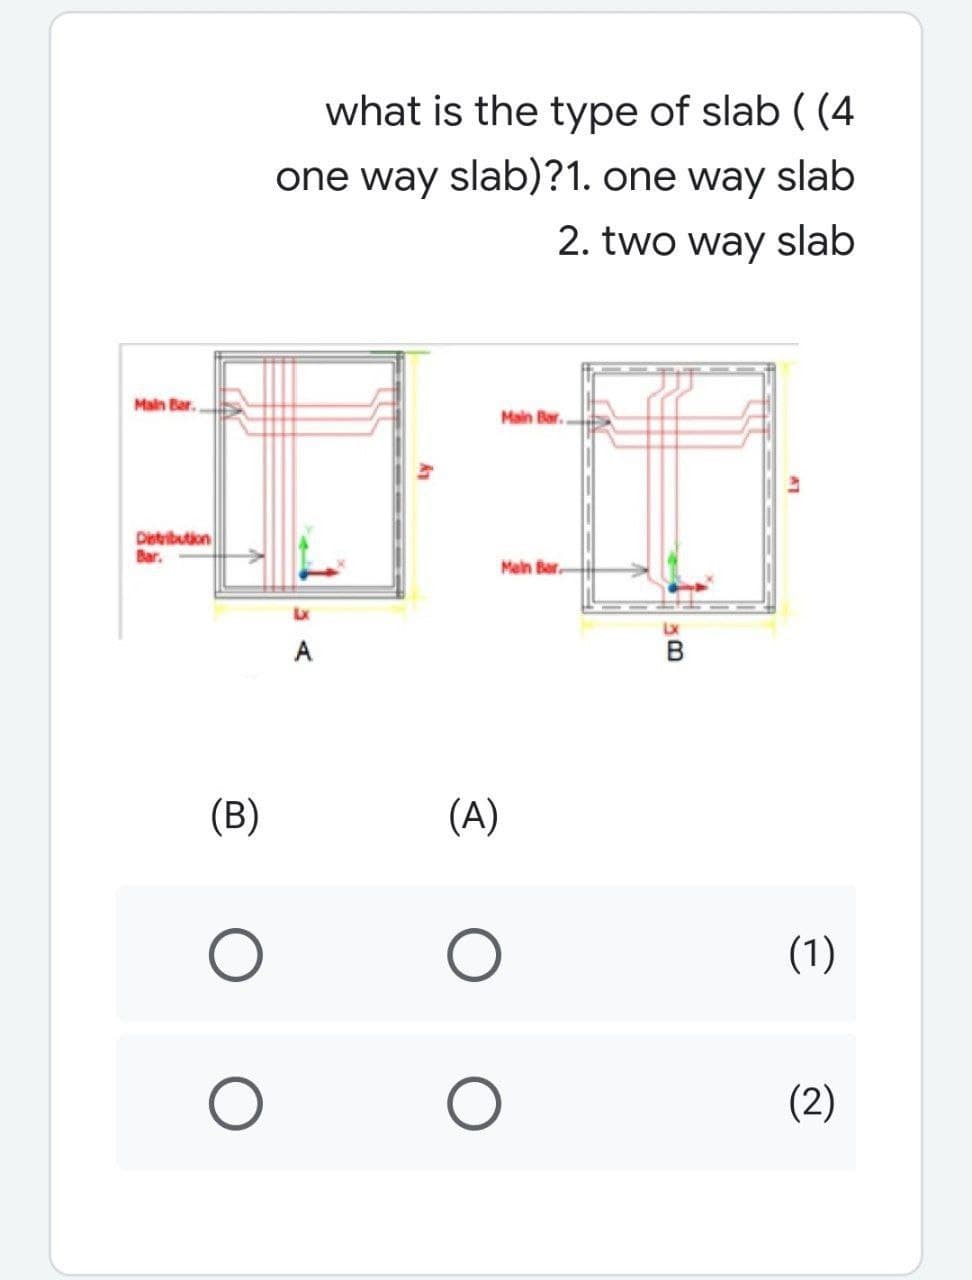 what is the type of slab ( (4
one way slab)?1. one way slab
2. two way slab
Main Bar.
Main Bar.
Distribution
Bar.
Main Bar.
Lx
A
(B)
(A)
(1)
(2)
